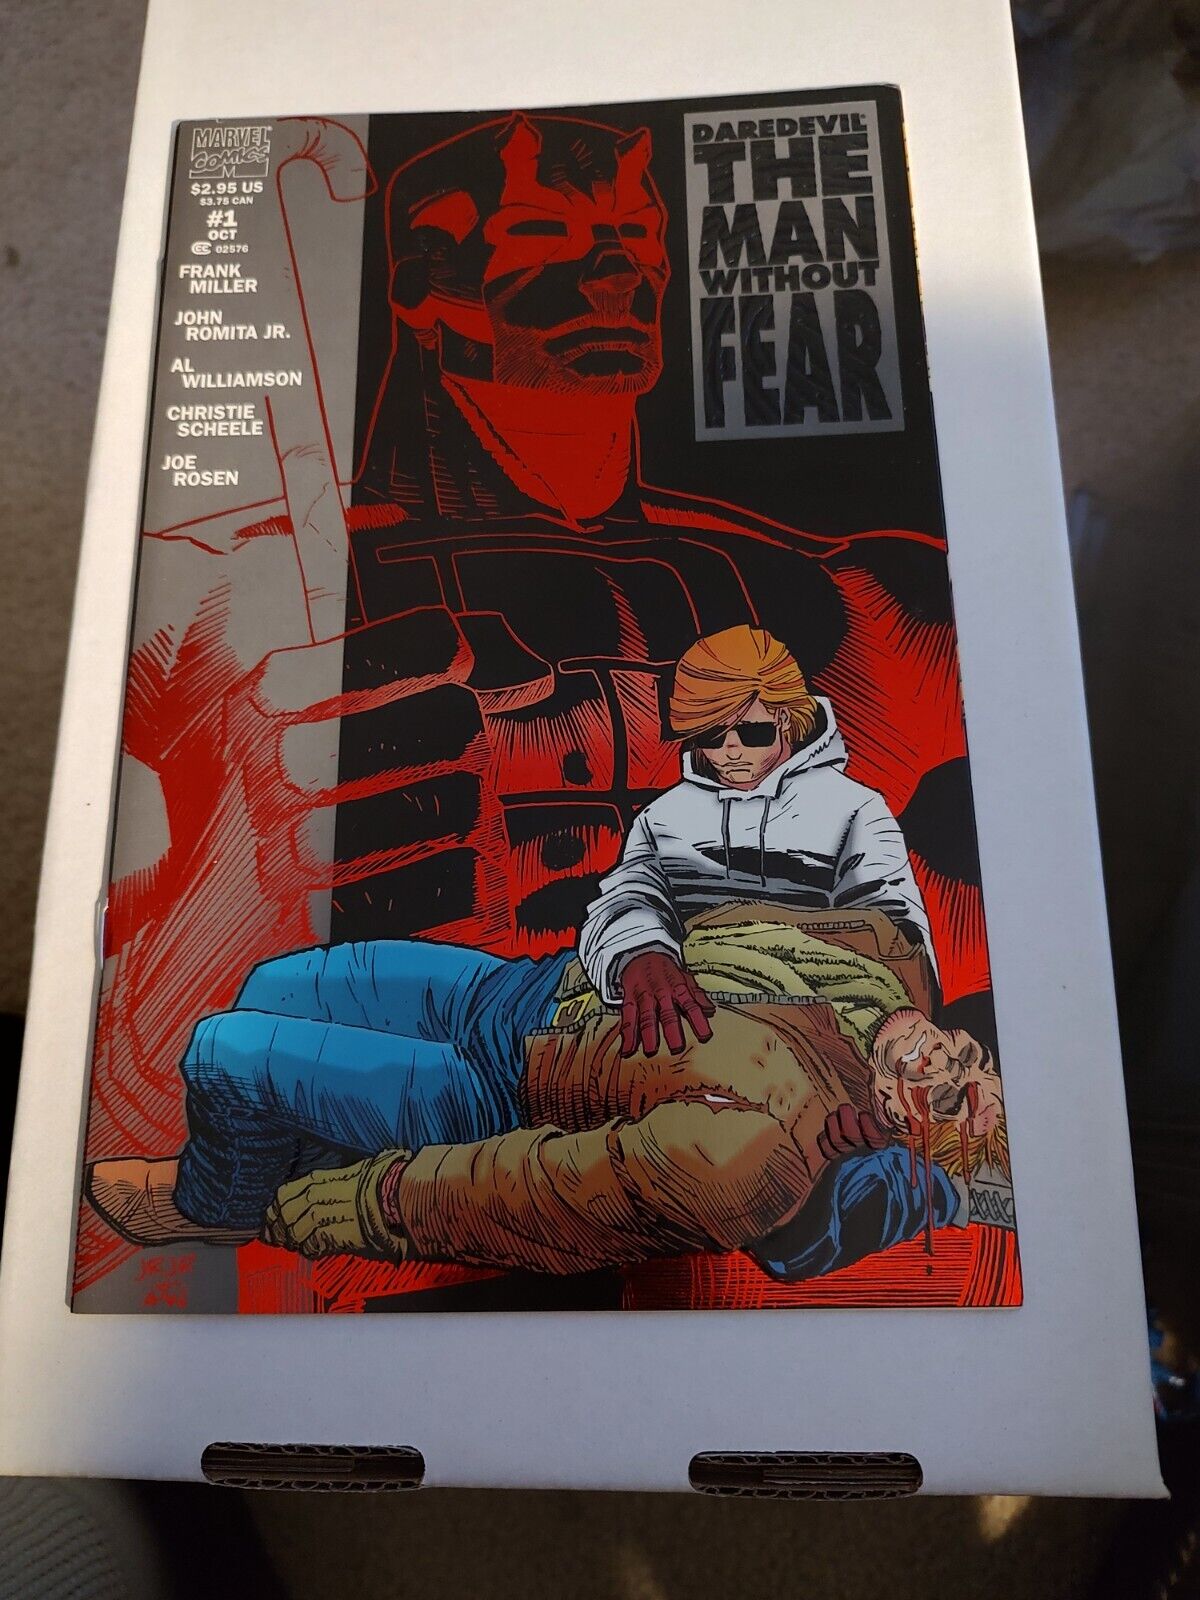 Daredevil The Man without fear #1 (1993) Newsstand. Original Owner and Unread